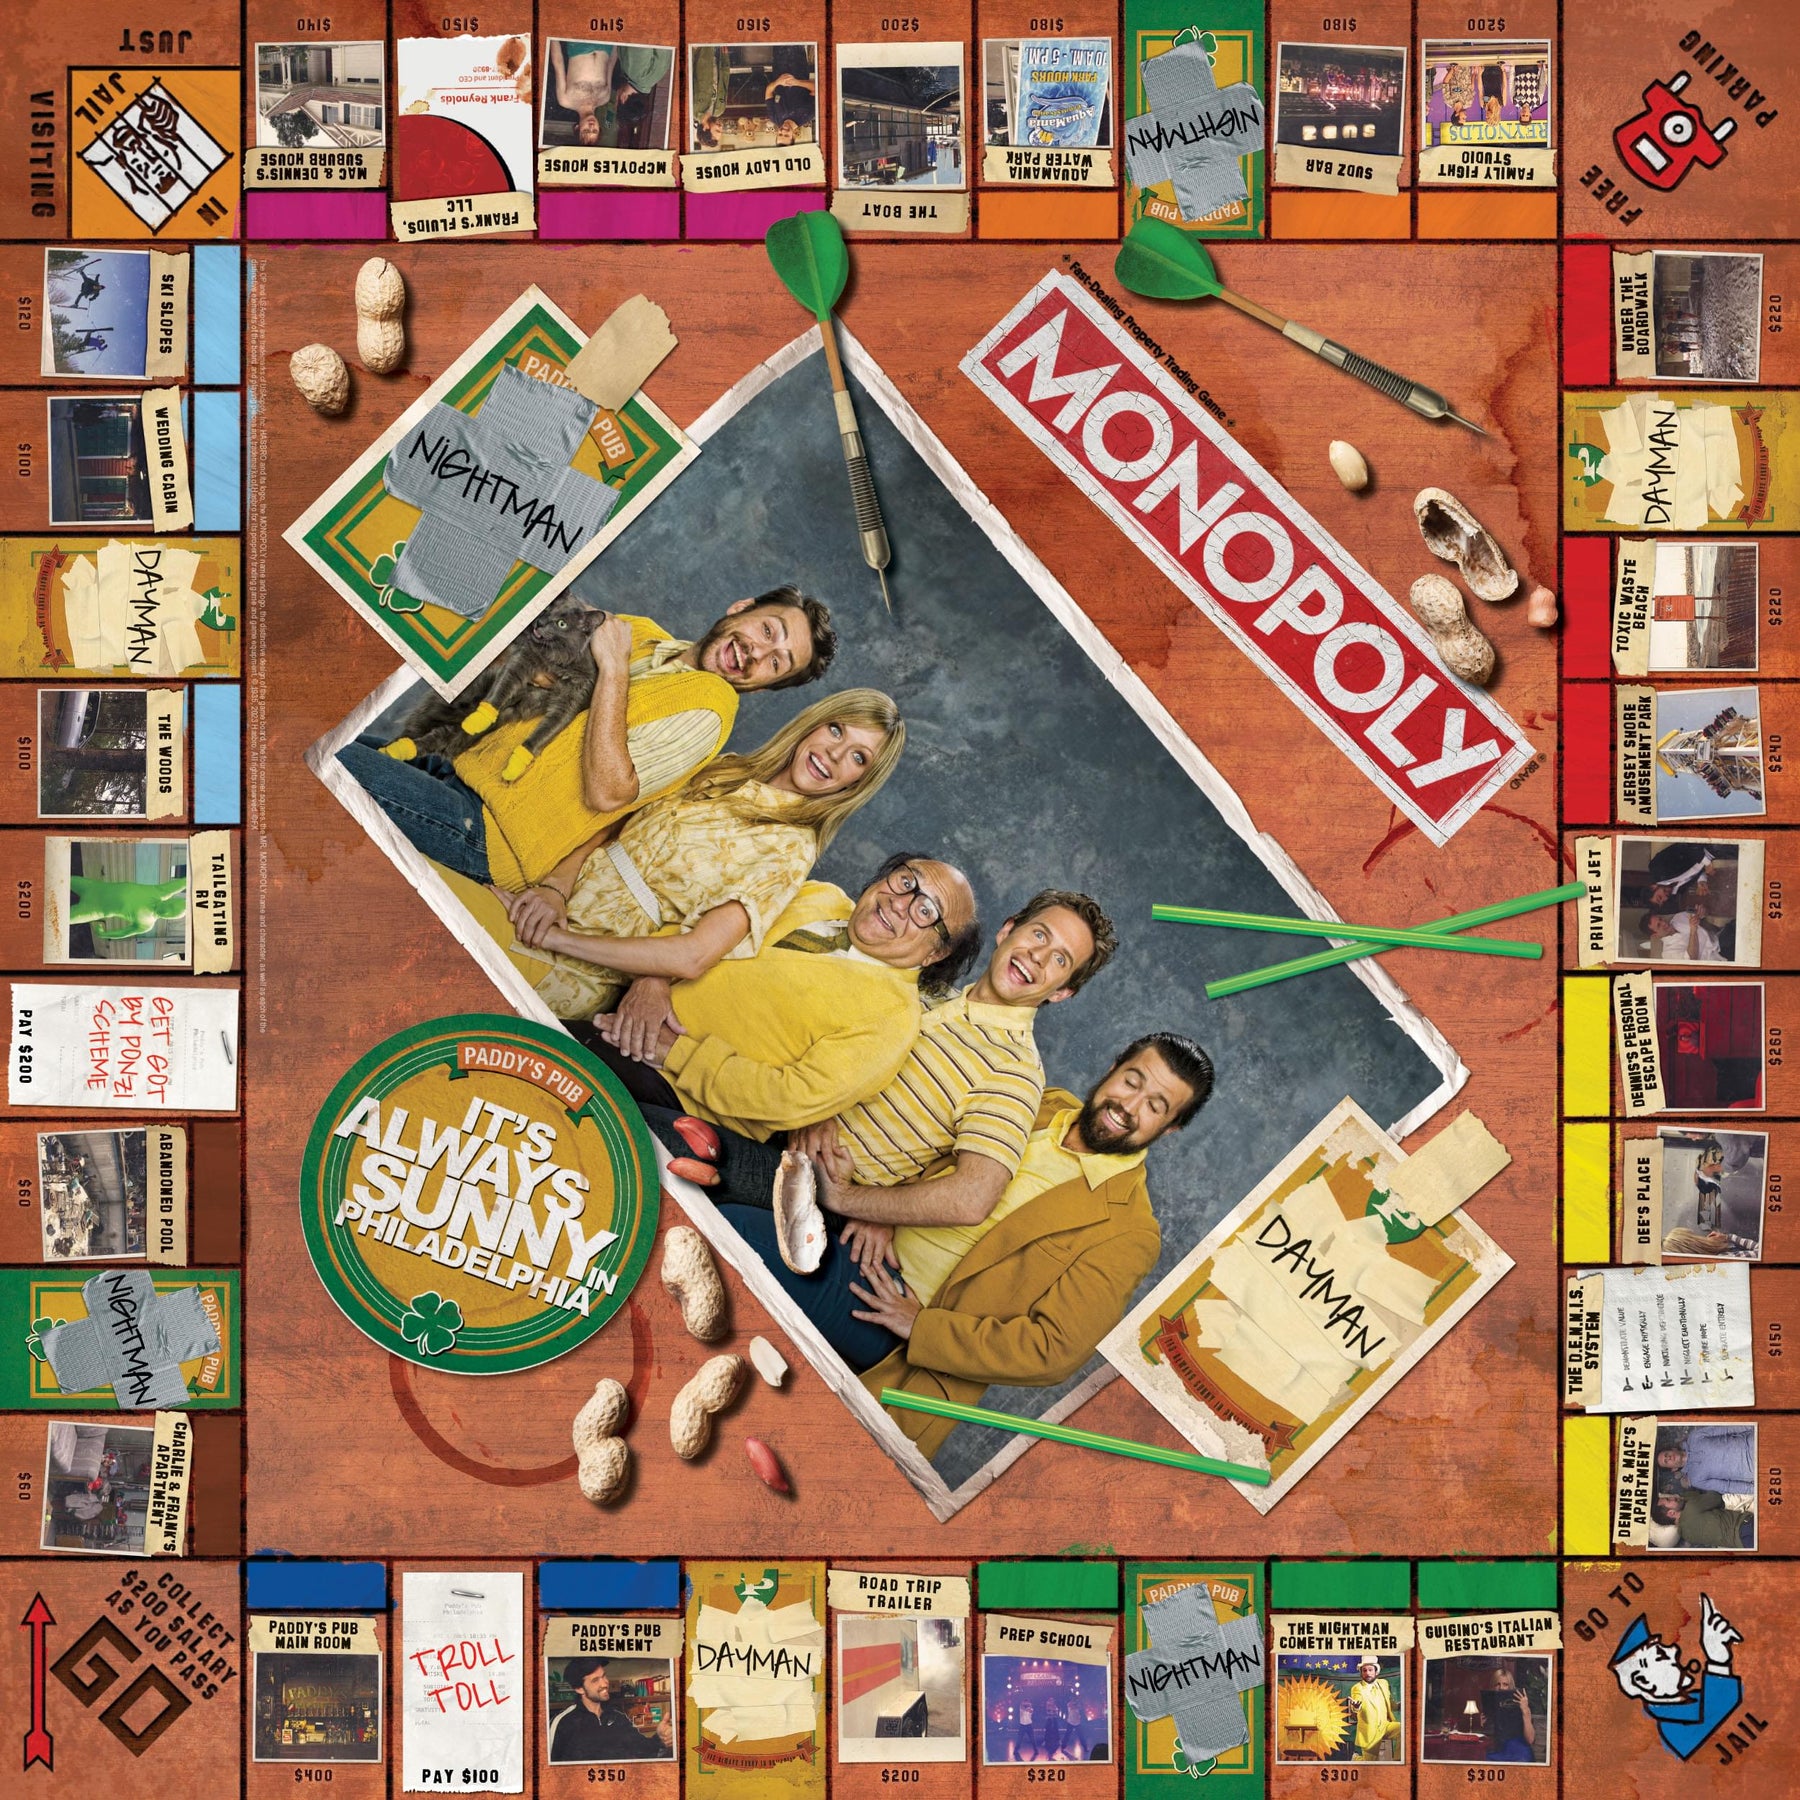 Its Always Sunny In Philadelphia Monopoly Board Game